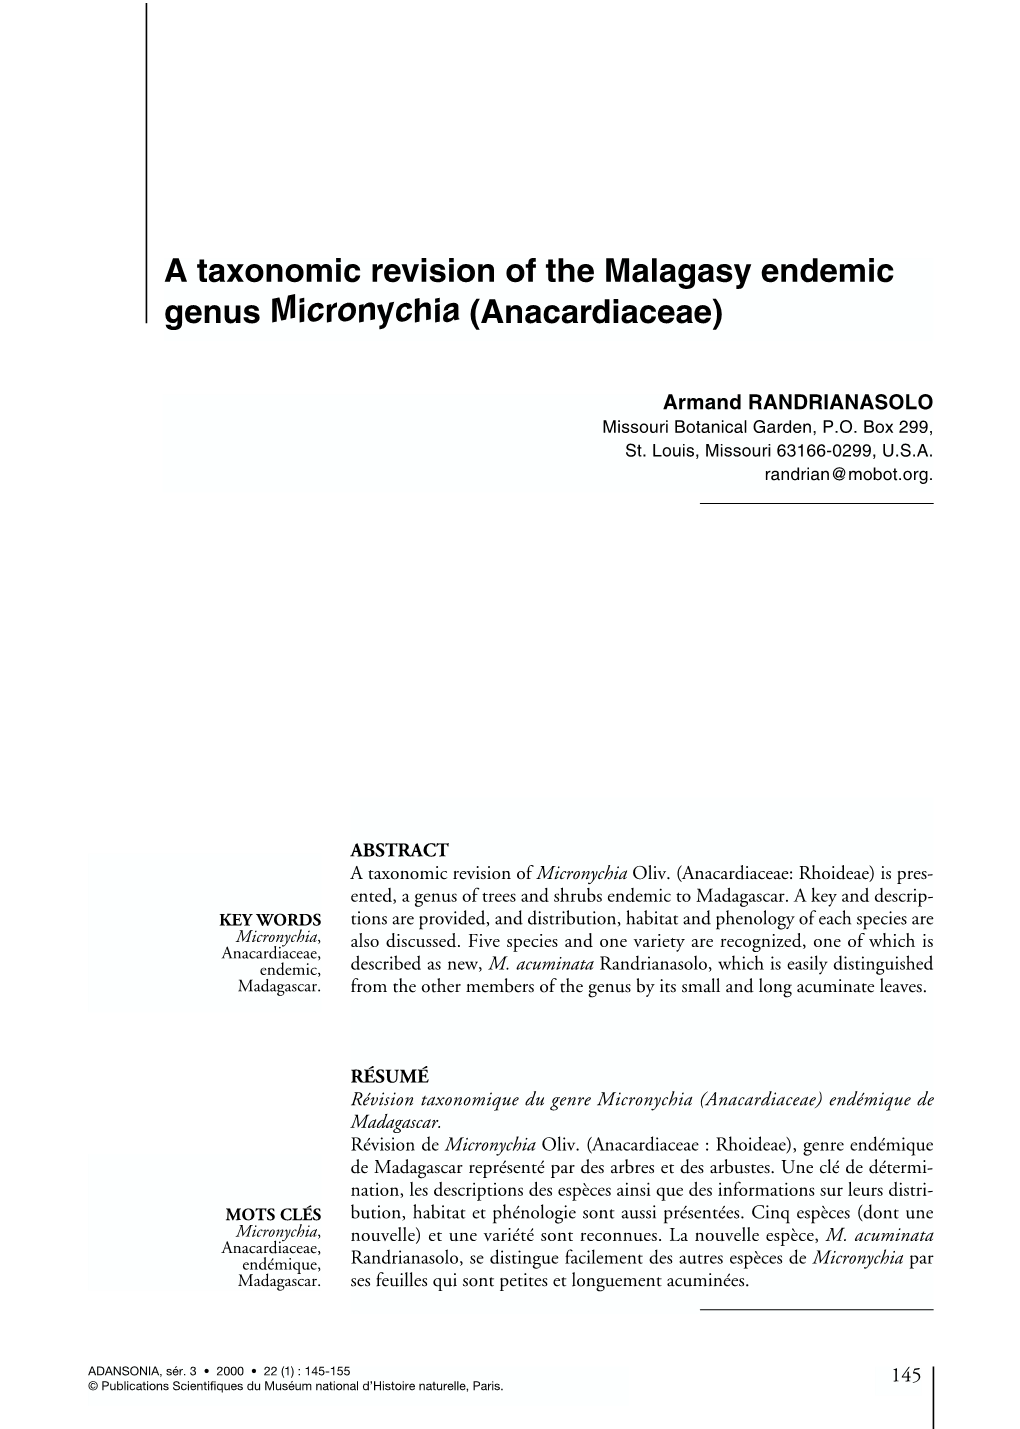 A Taxonomic Revision of the Malagasy Endemic Genus Micronychia (Anacardiaceae)